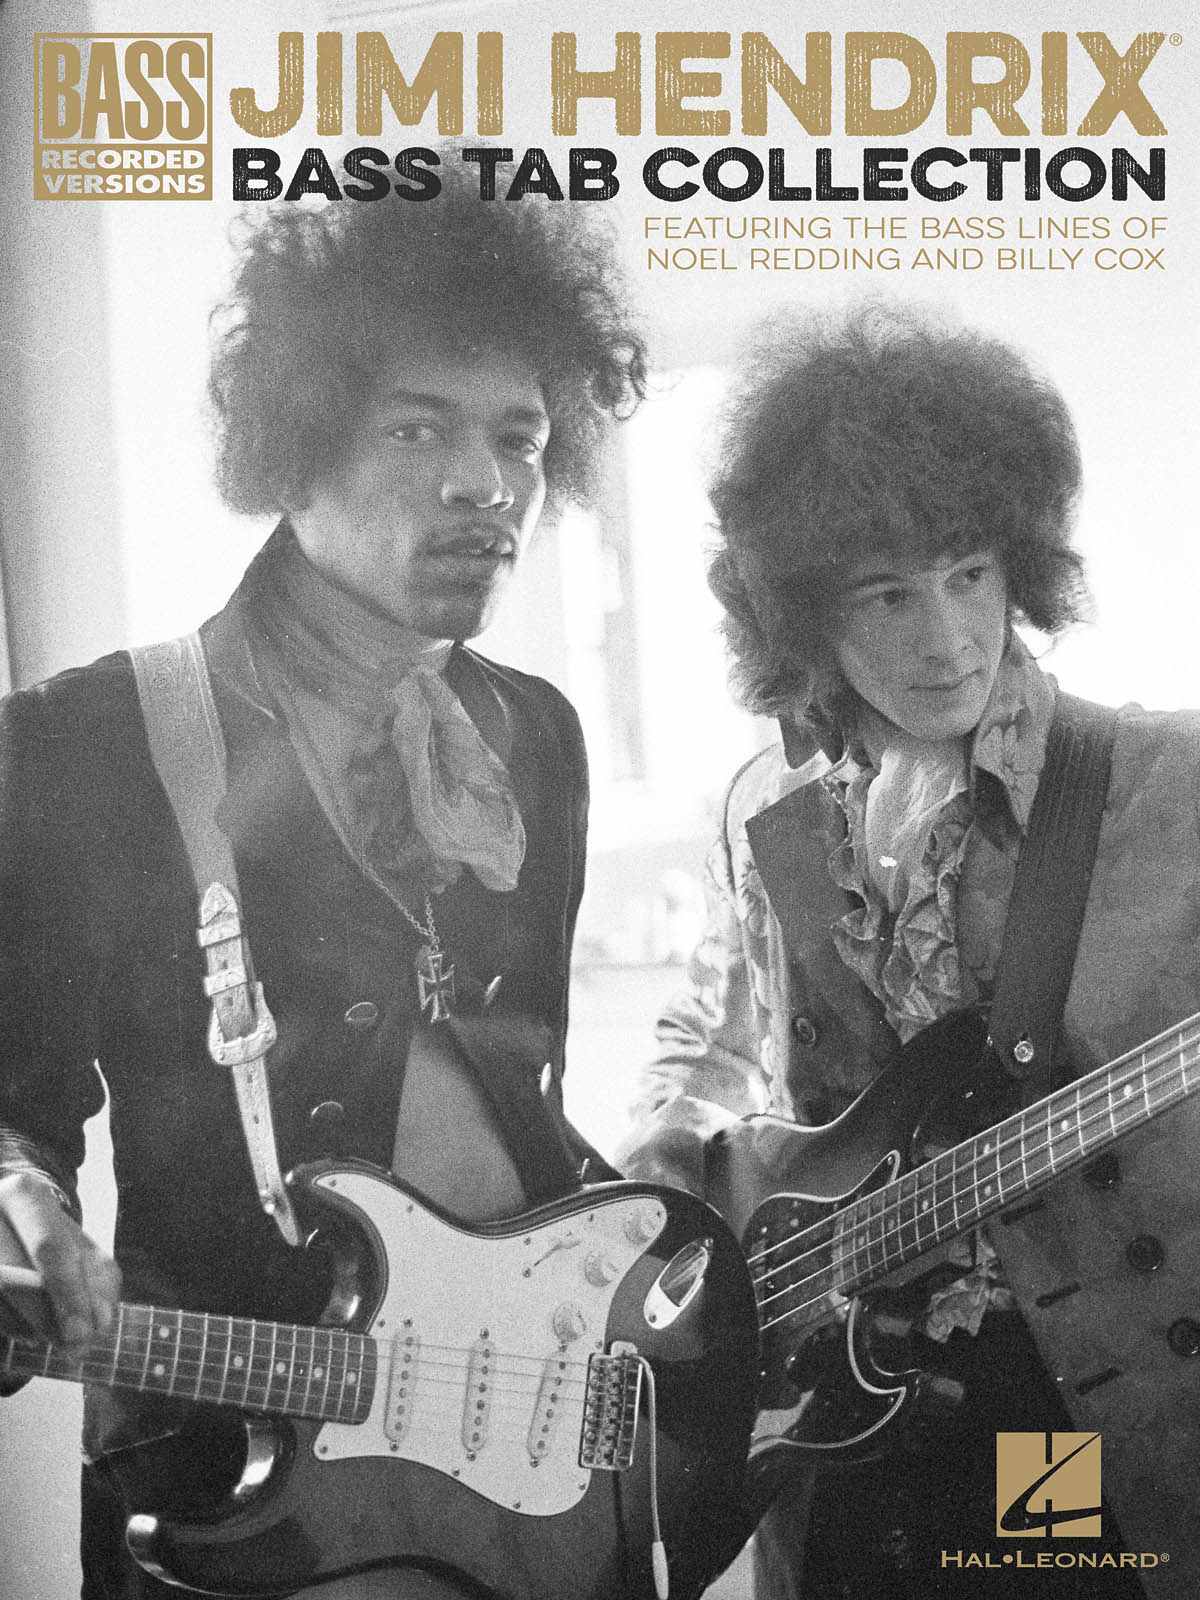 Jimi Hendrix Bass Tab Collection - Featuring the Bass Lines of Noel Redding and Billy Cox - noty na basovou kytaru